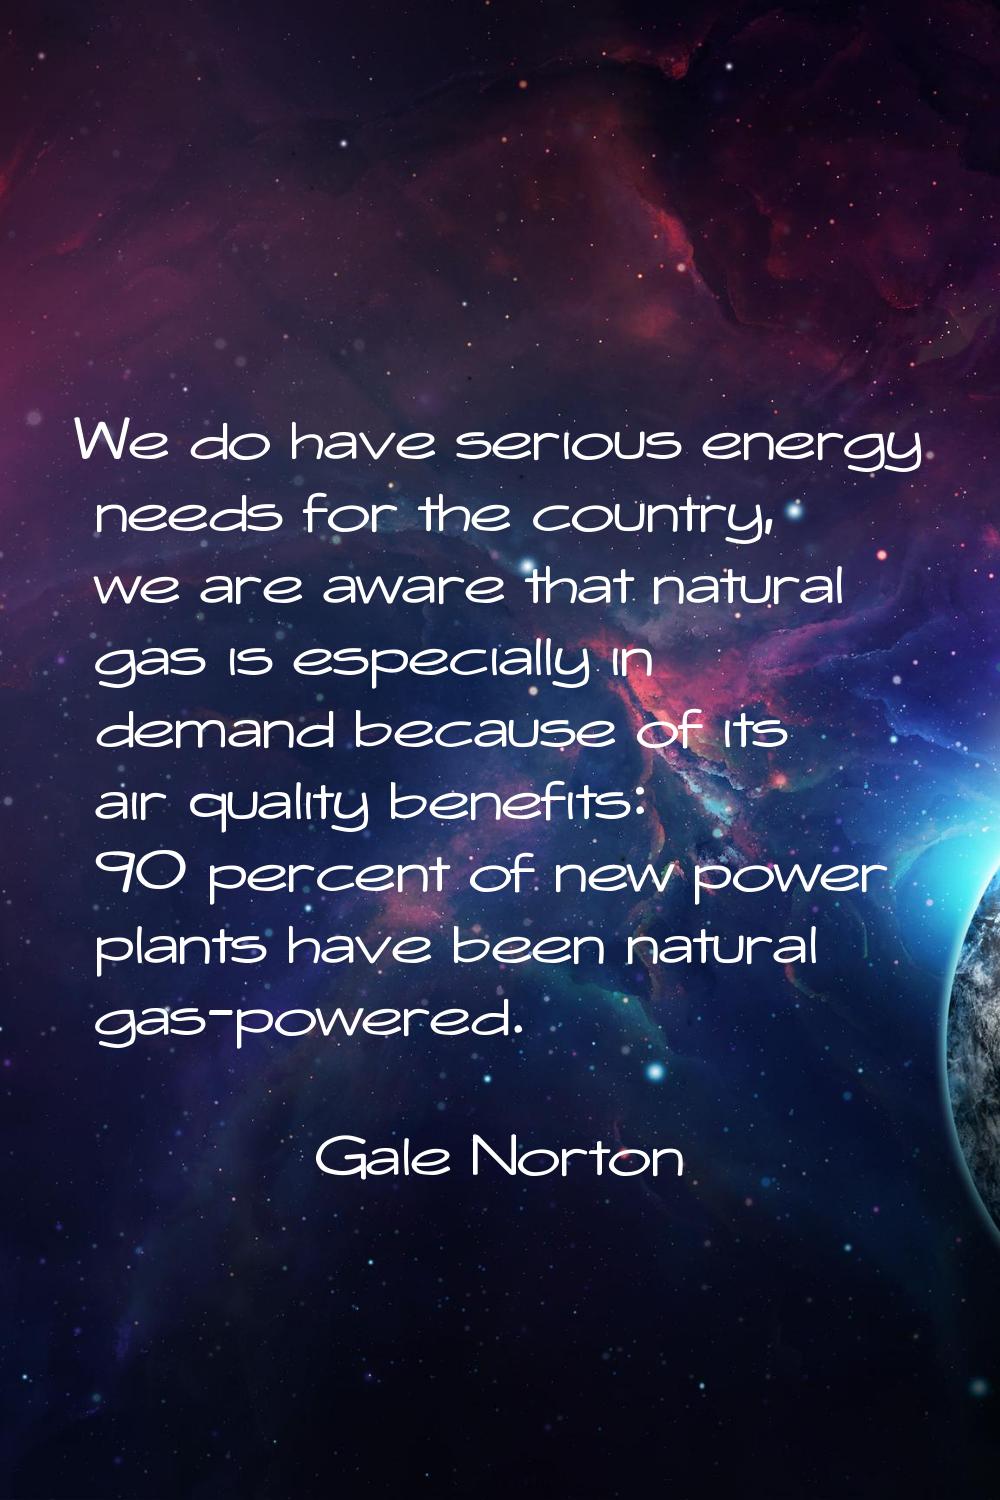 We do have serious energy needs for the country, we are aware that natural gas is especially in dem